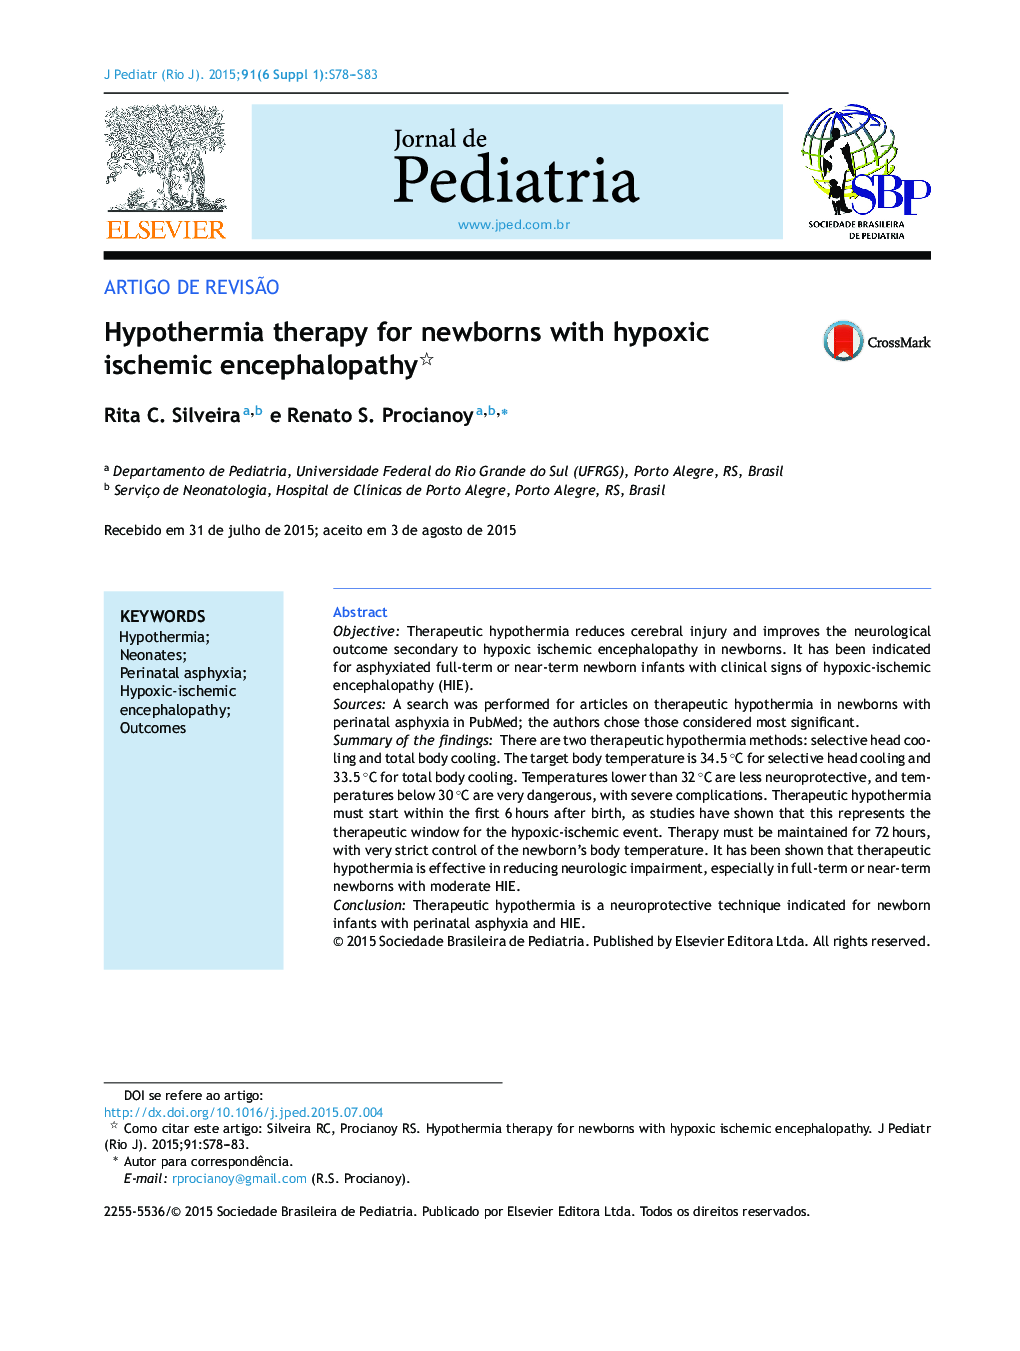 Hypothermia therapy for newborns with hypoxic ischemic encephalopathy 